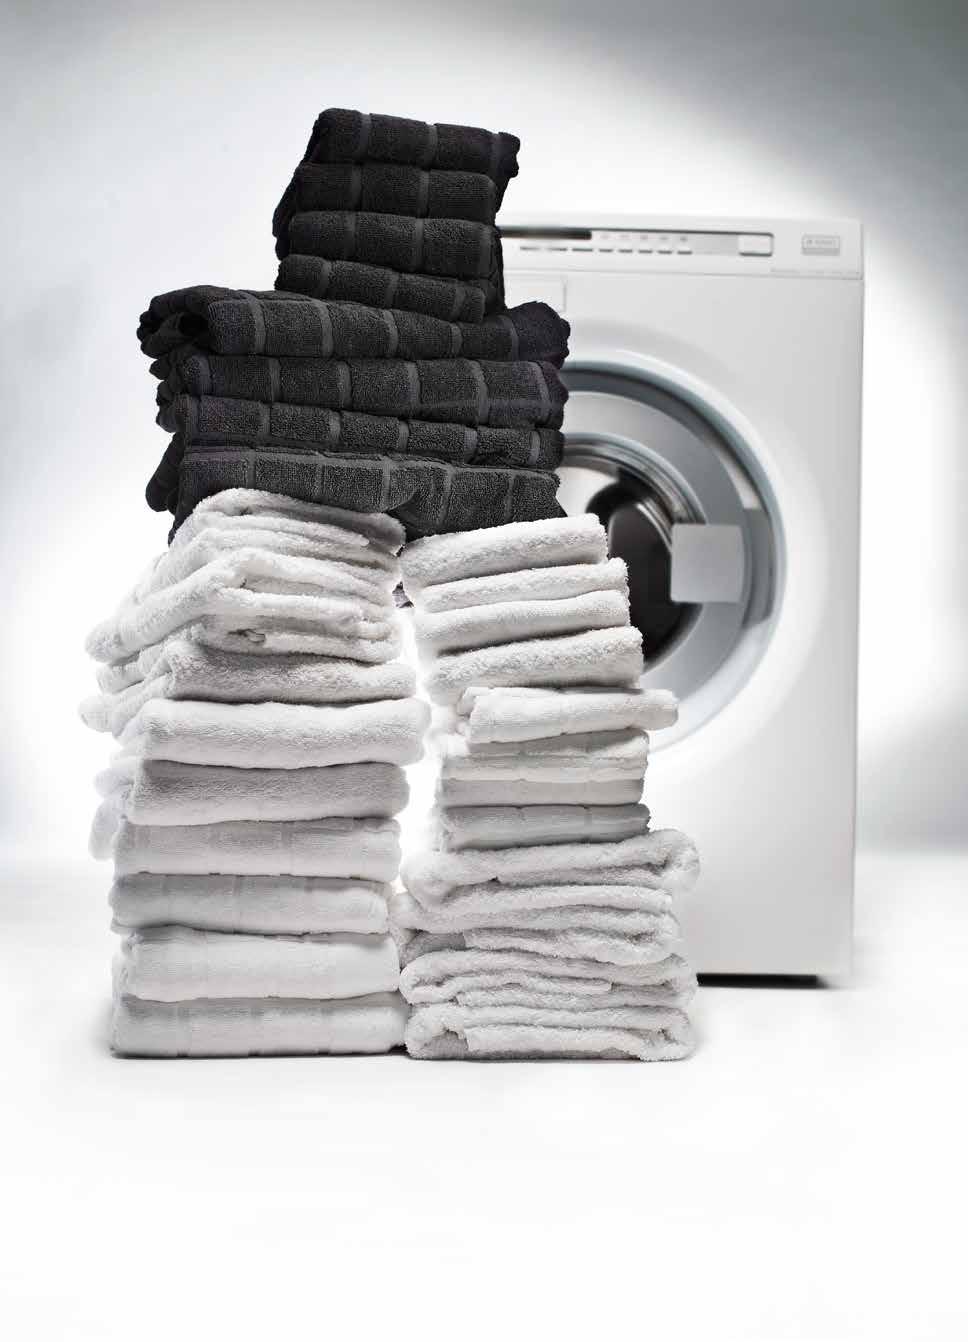 Washers W8844 XL - ECO* Type: Front-loaded Colour: White Energy efficiency class A+++ Spin drying performance class A Capacity cotton 11 kg Noise level washing/spinning: 45/72 db(a) 12 Super wash